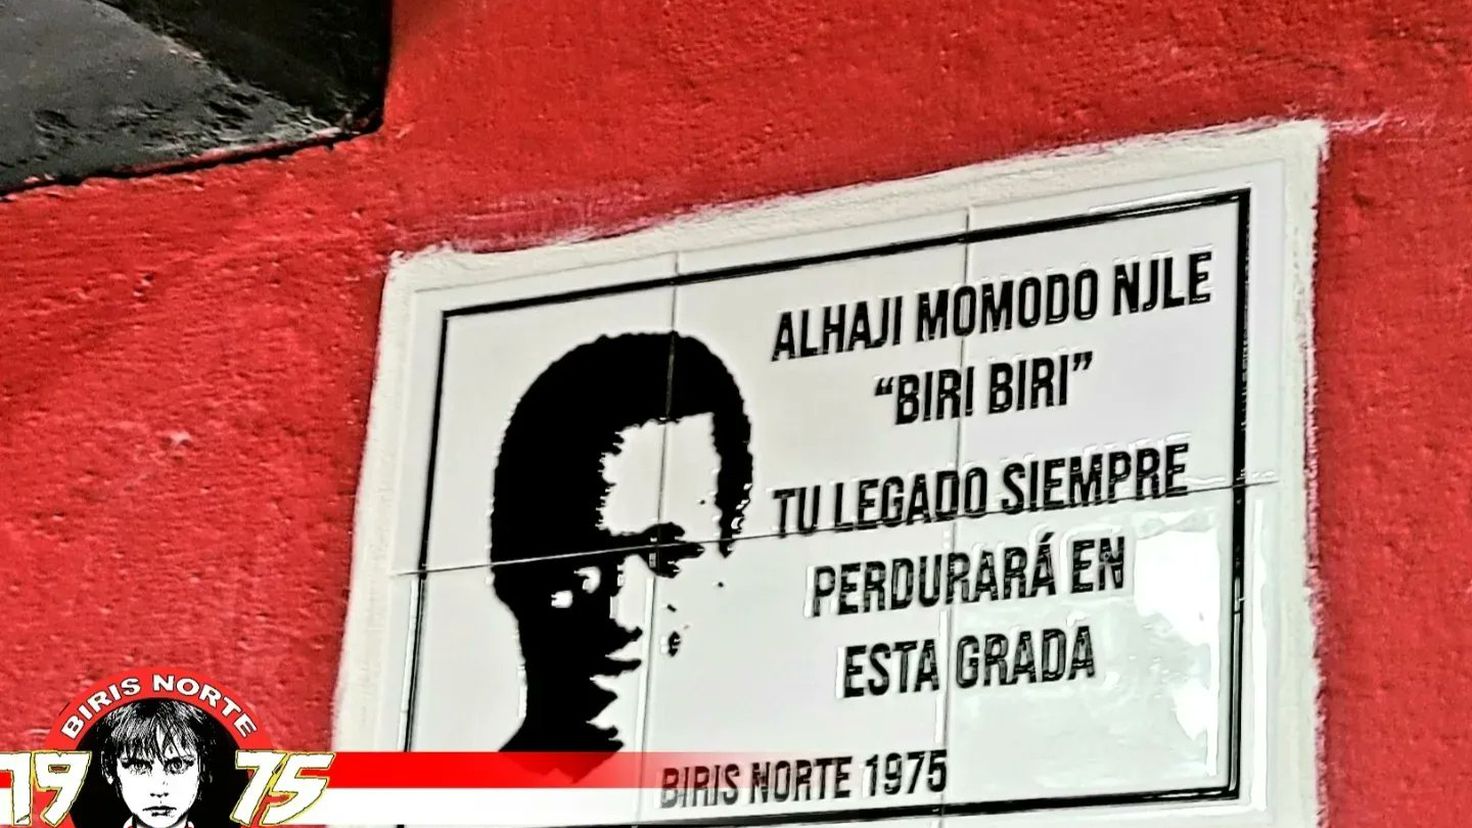 Biris Norte: they bear the name of a black man and declare themselves anti-racist
